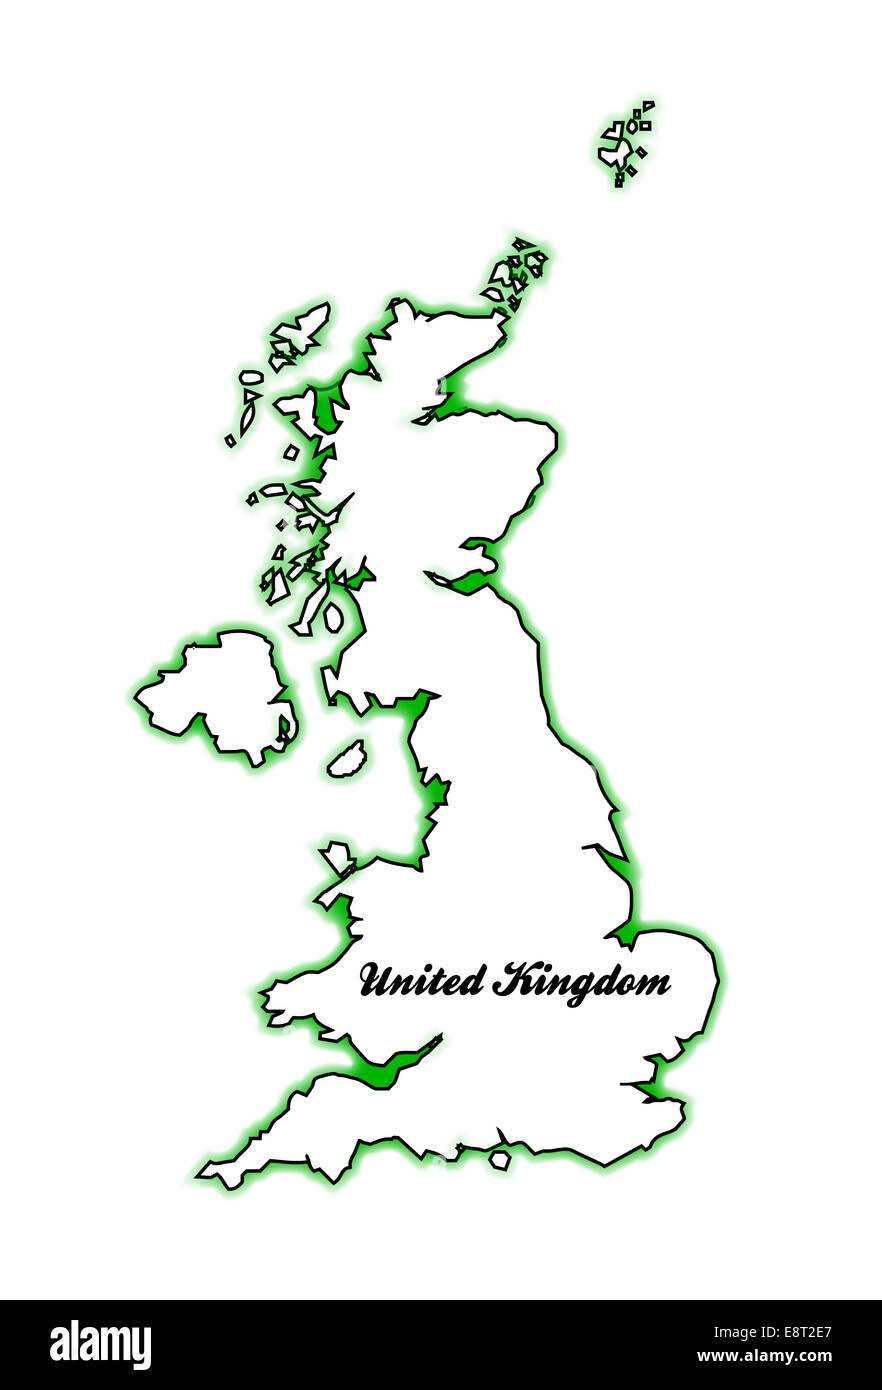 Outline map of the United Kingdom of England Scotland Northern Ireland and Wales over white Stock Photo